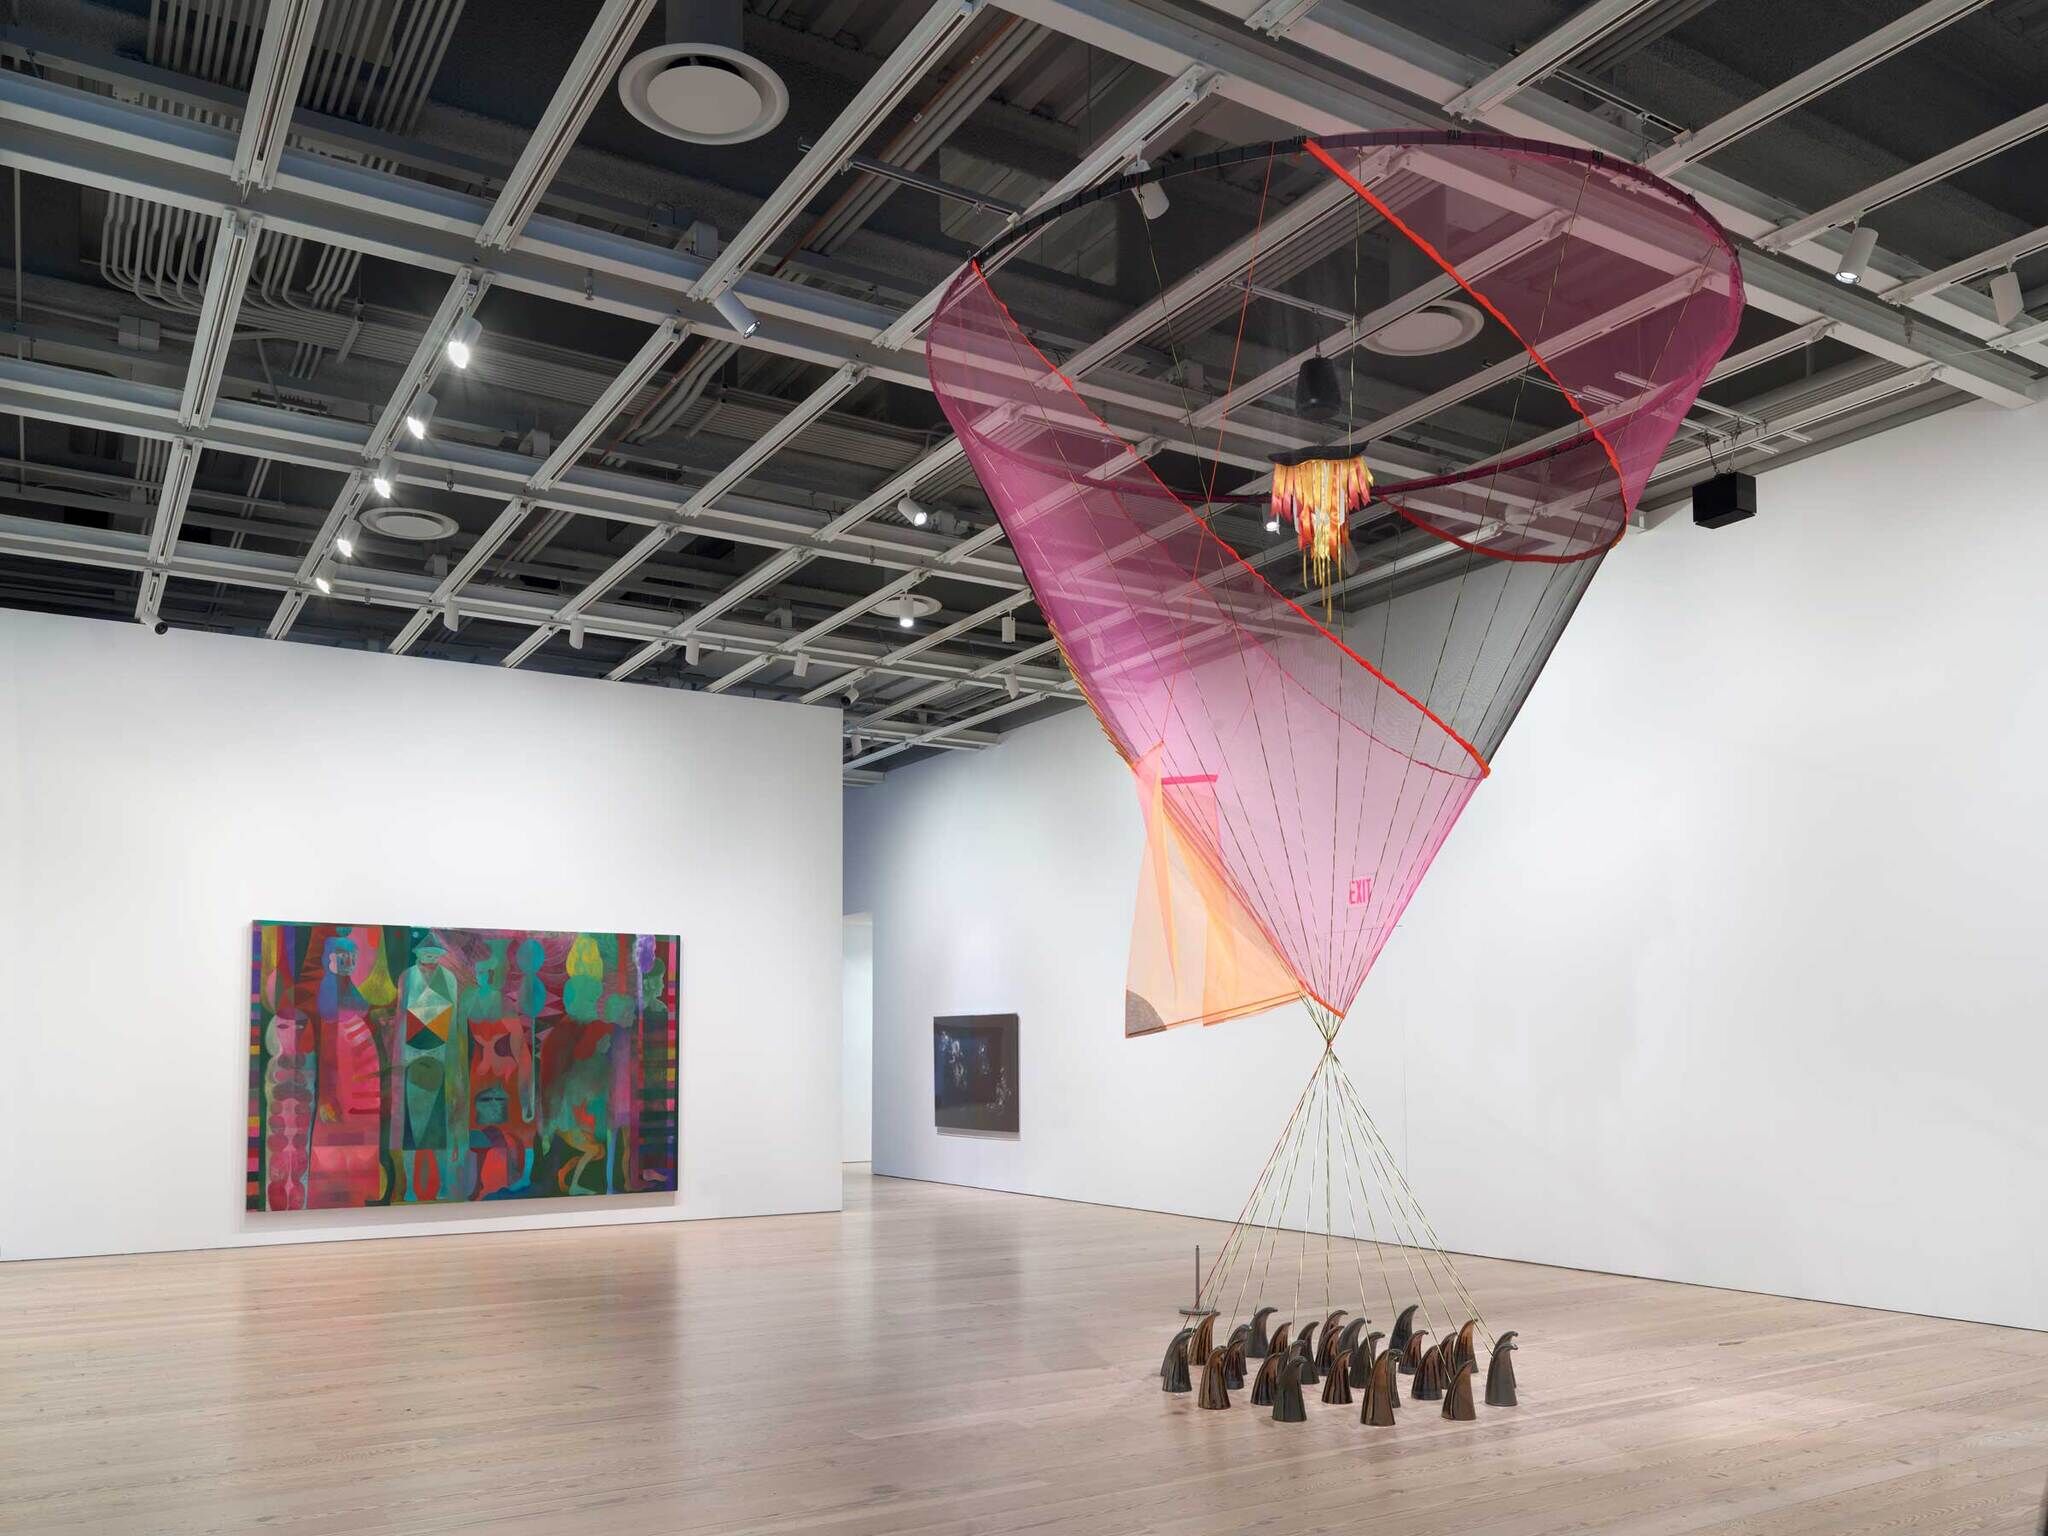 A large, colorful suspended sculpture resembling an upside down teepee dominates an art gallery with paintings on the walls.